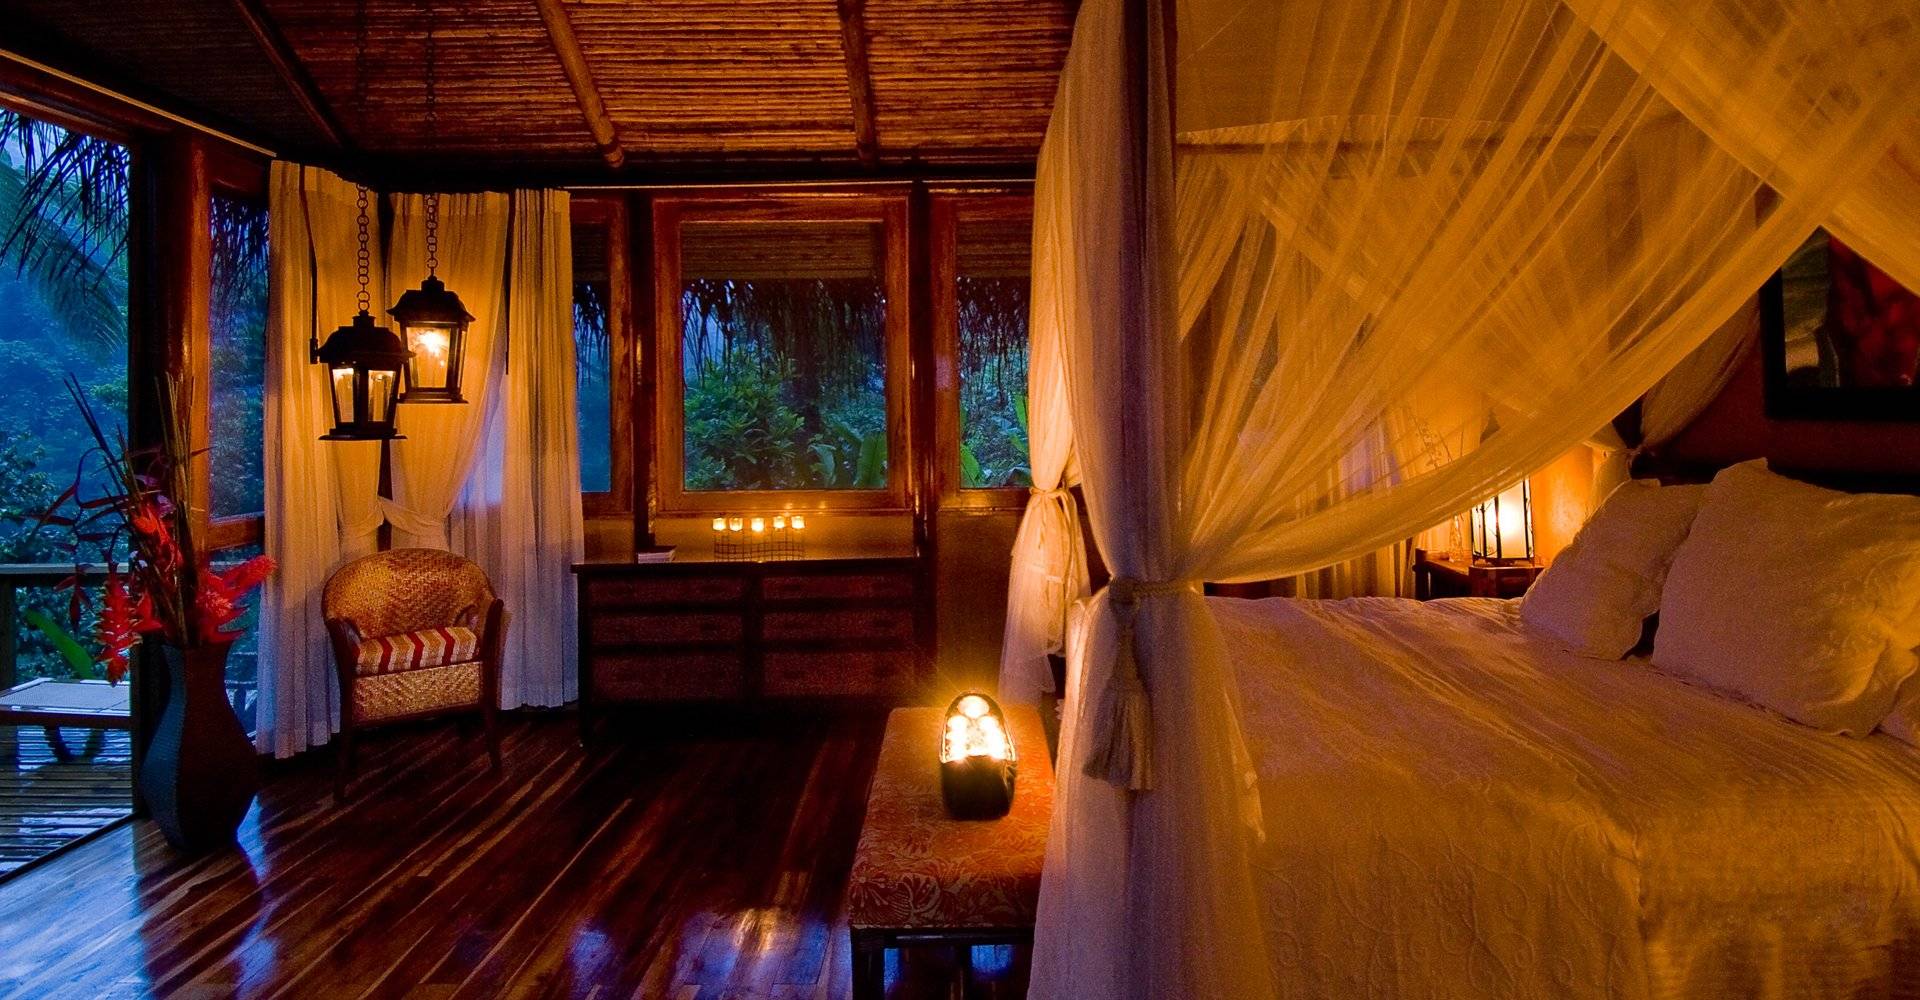 Costa Rica, Pacuare Lodge, Canopy Suite, Latin America Tours